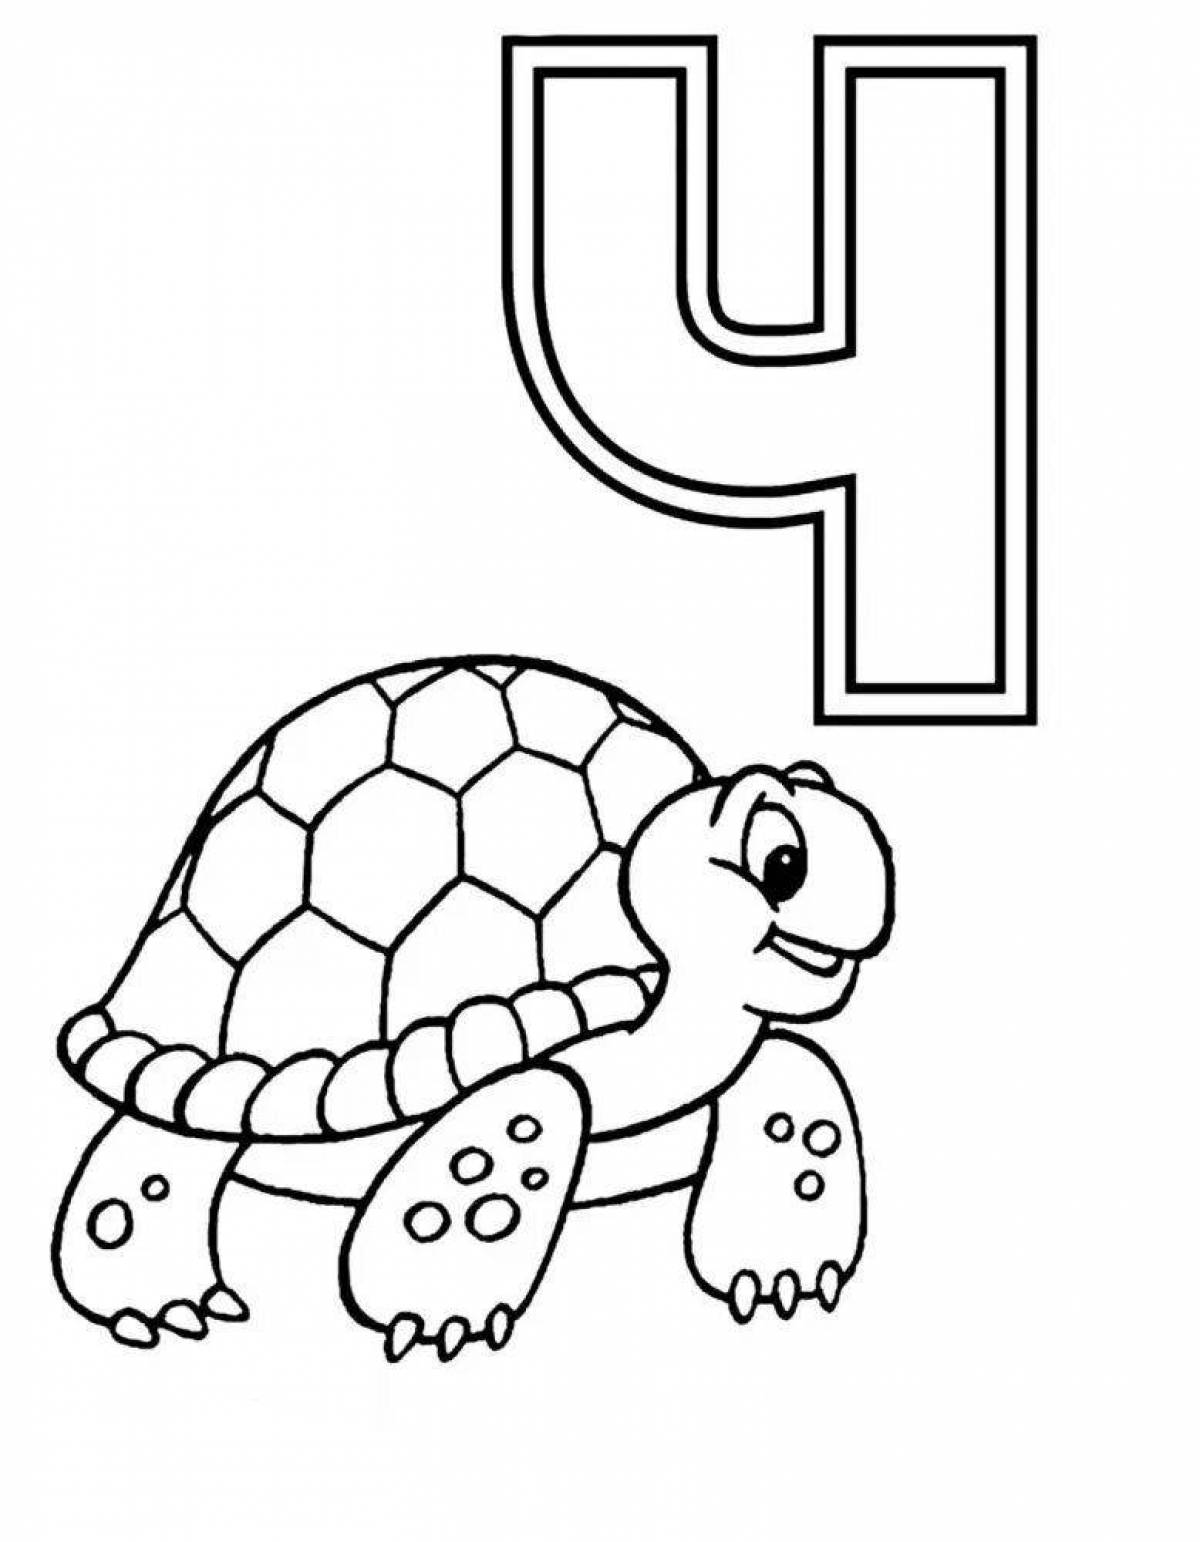 Fun coloring pages with letters for children 3-4 years old